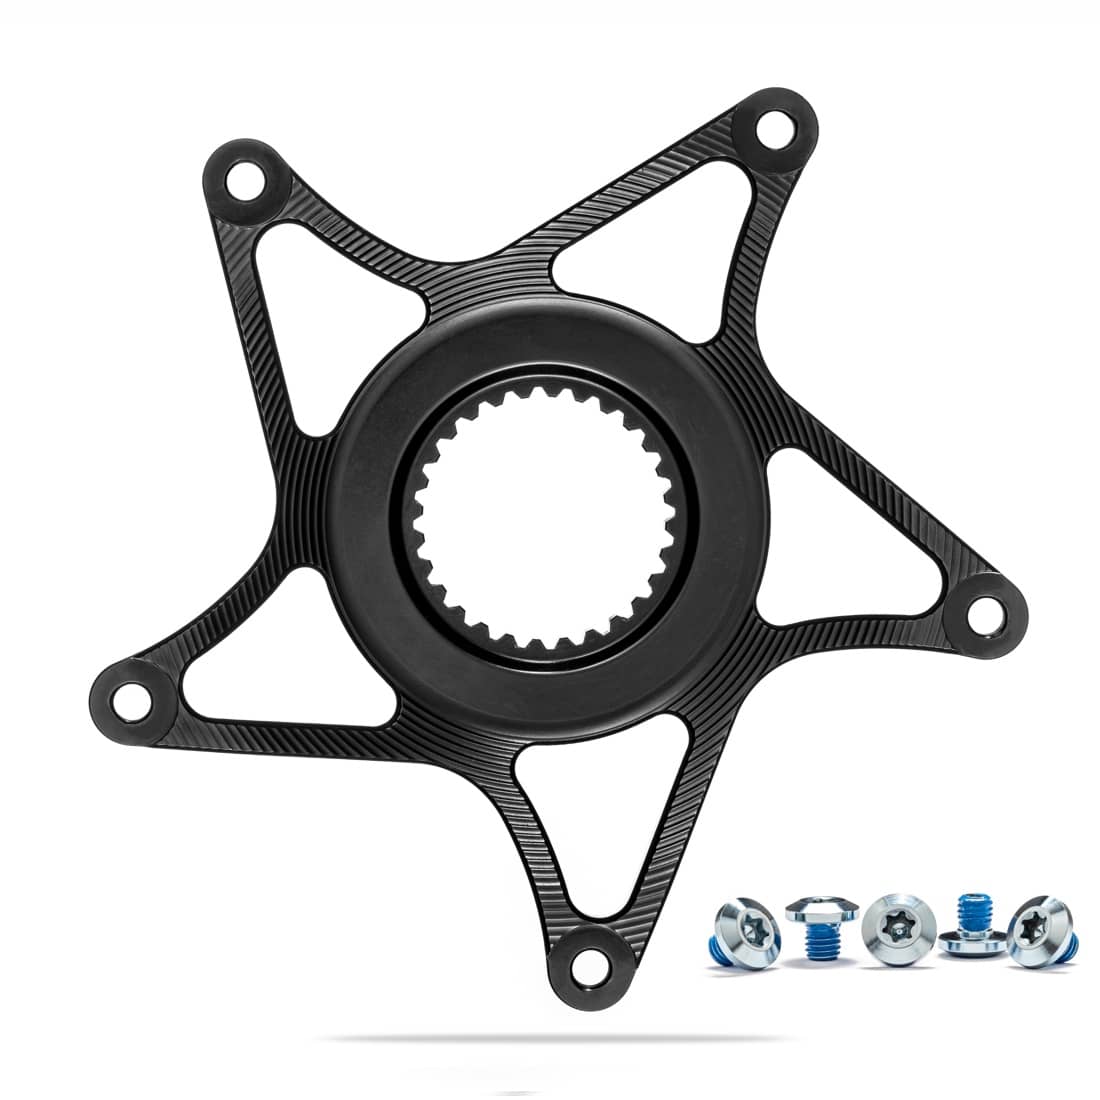 absoluteBLACK: We have Proven OVAL chainrings. More Performance 